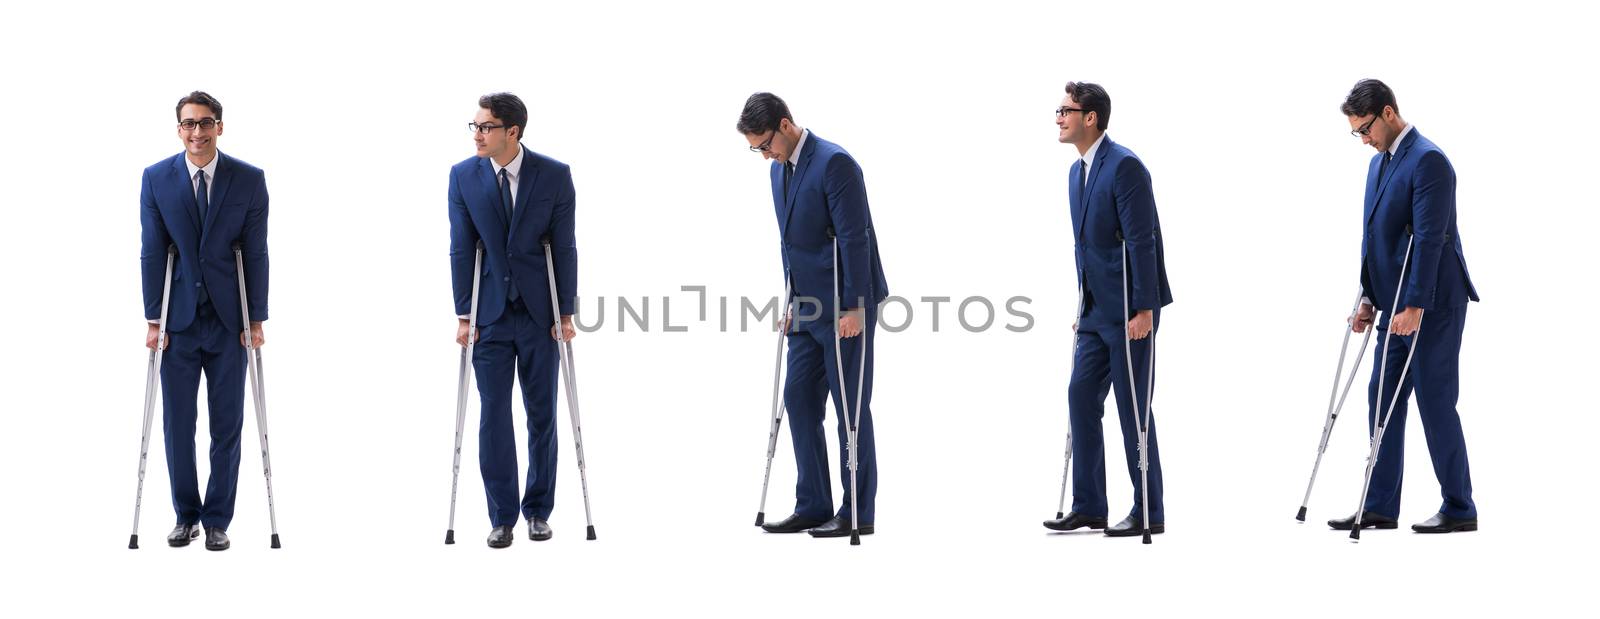 Businessman walking with crutches isolated on white background